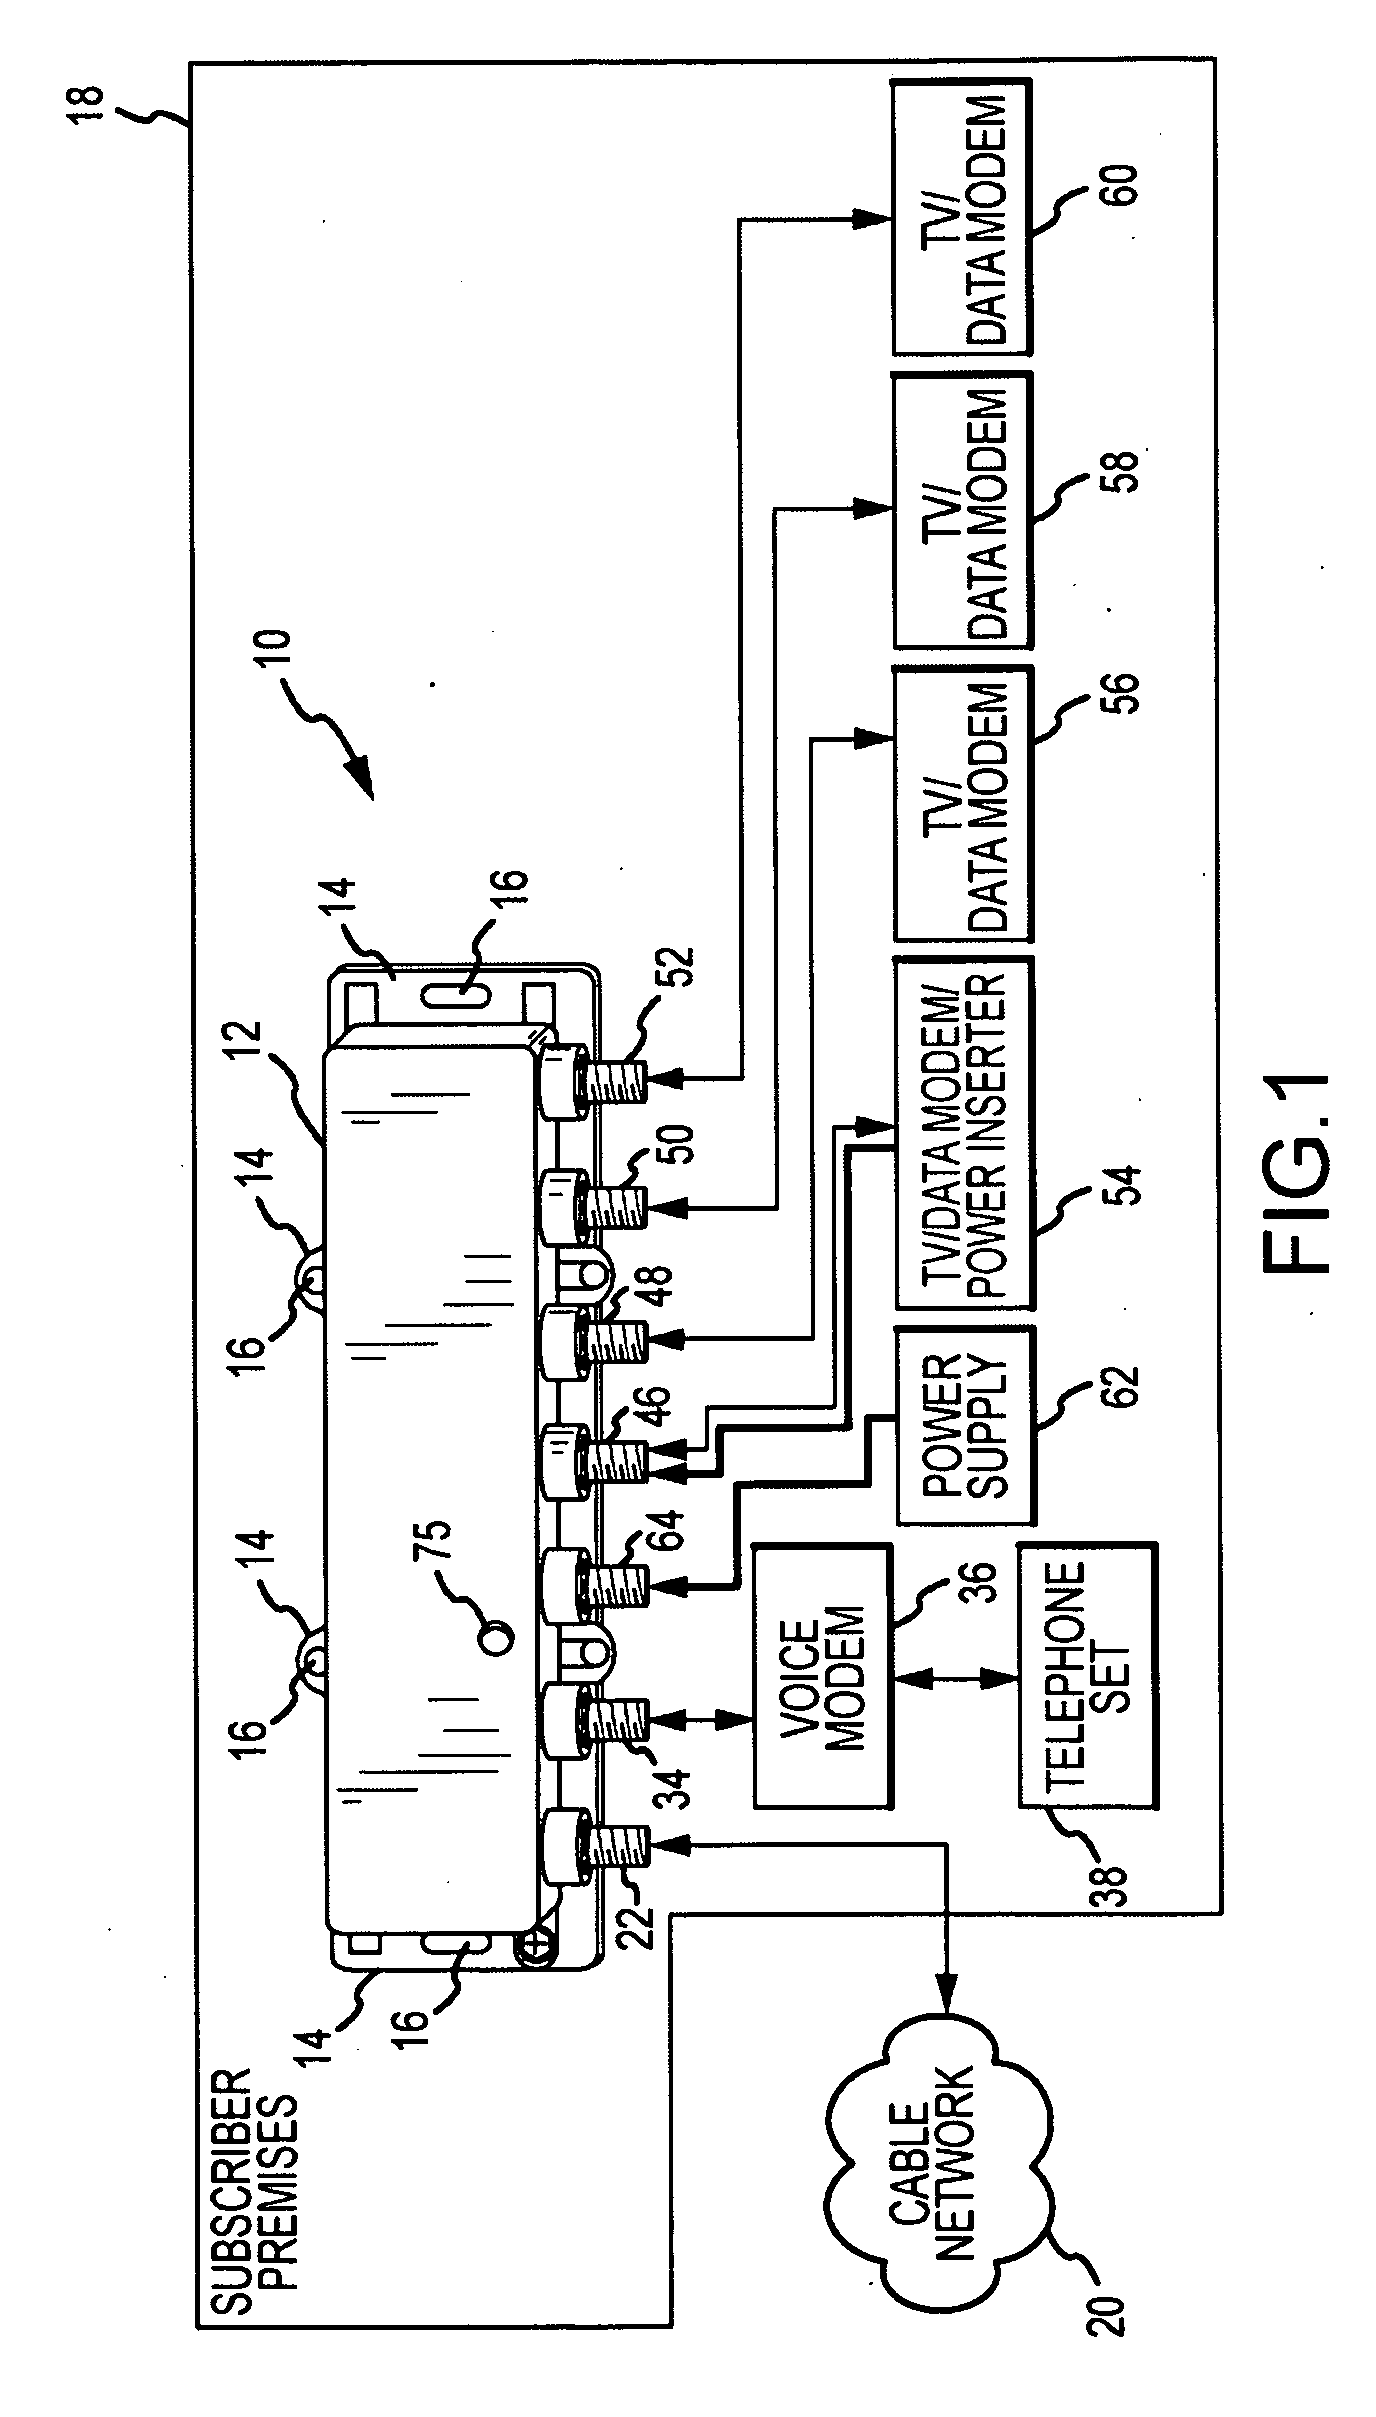 Passive-Active Terminal Adapter and Method Having Automatic Return Loss Control